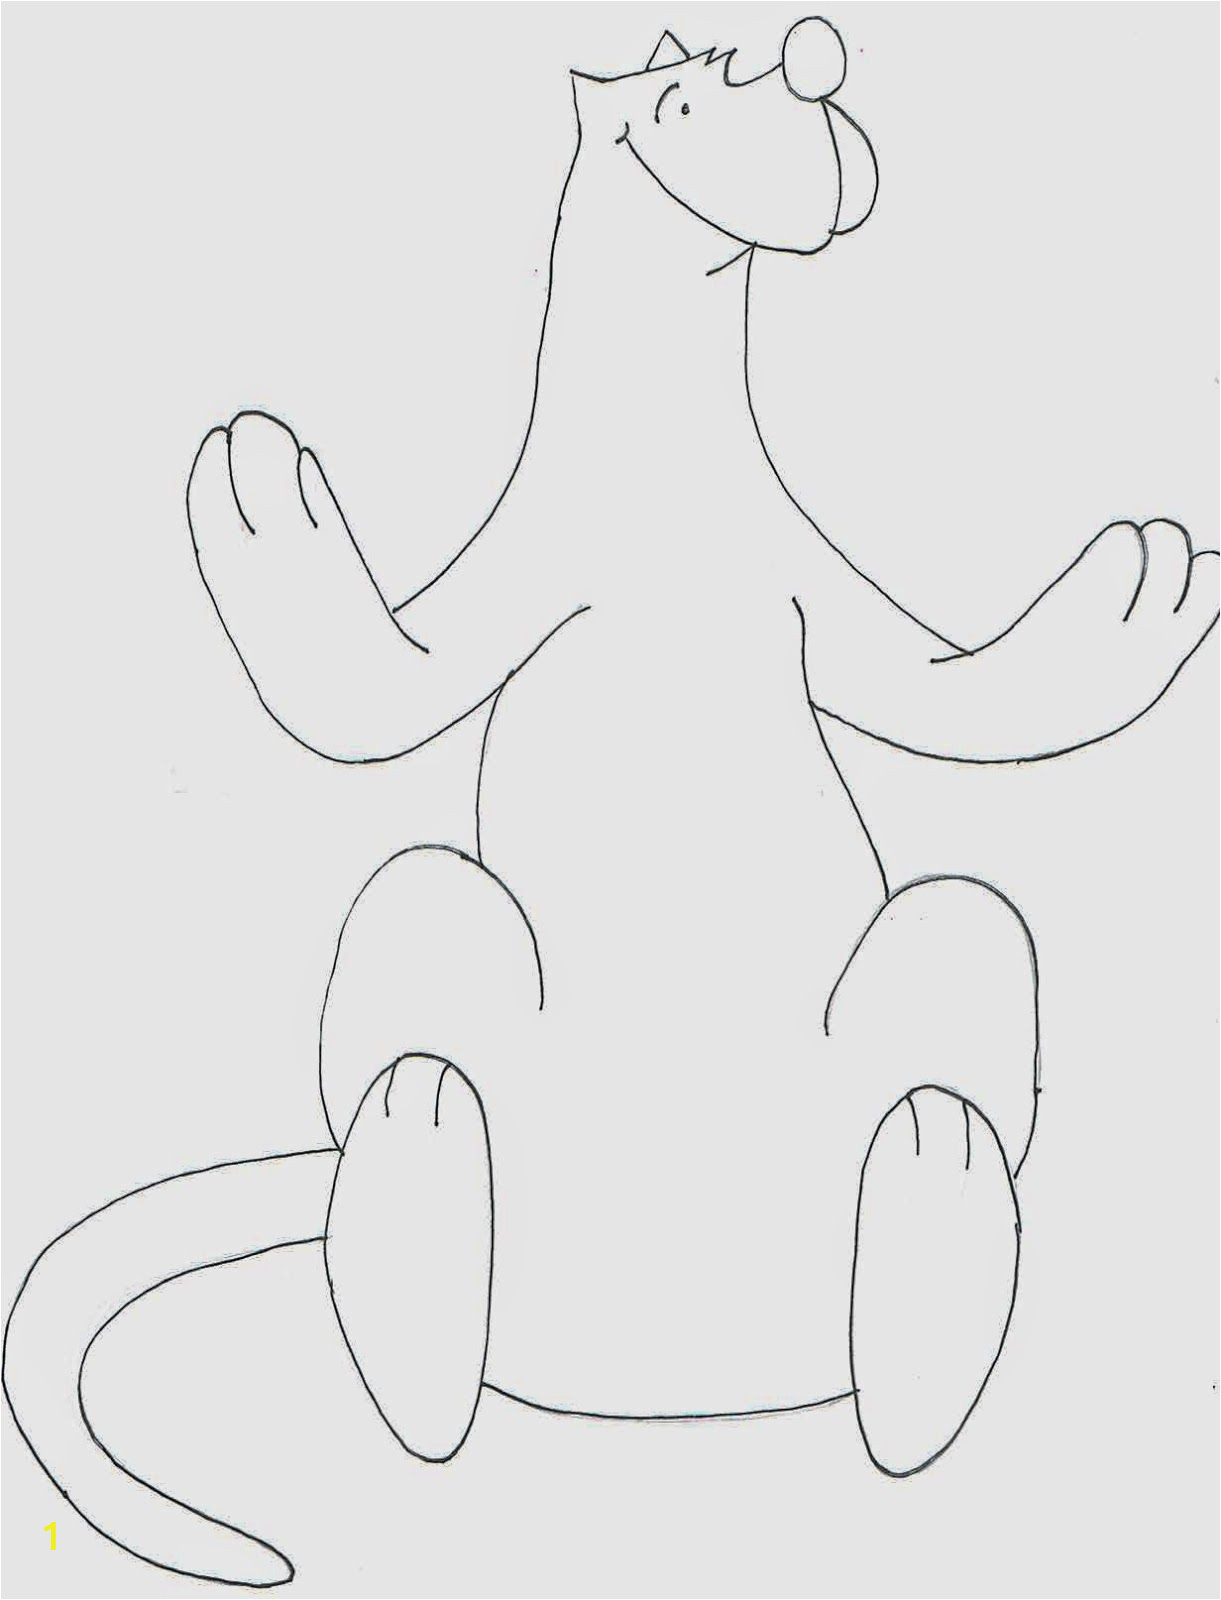 Dr Seuss Put Me In the Zoo Coloring Page Color Pages 45 Awesome Put Me In the Zoo Coloring Page Put